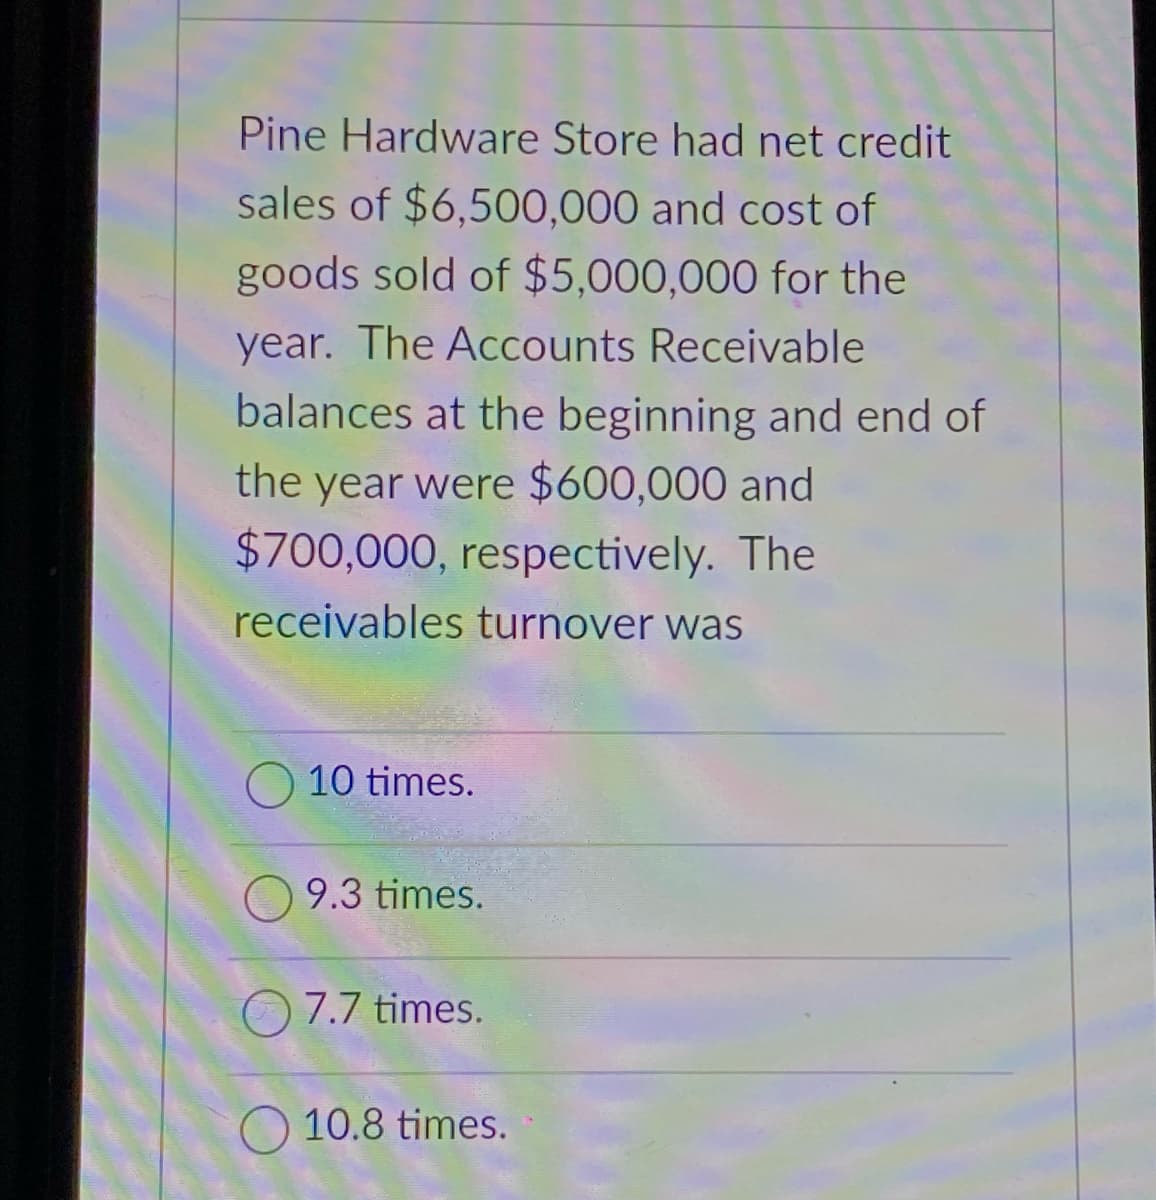 Pine Hardware Store had net credit
sales of $6,500,000 and cost of
goods sold of $5,000,000 for the
year. The Accounts Receivable
balances at the beginning and end of
the year were $600,000 and
$700,000, respectively. The
receivables turnover was
10 times.
9.3 times.
O 7.7 times.
10.8 times.
